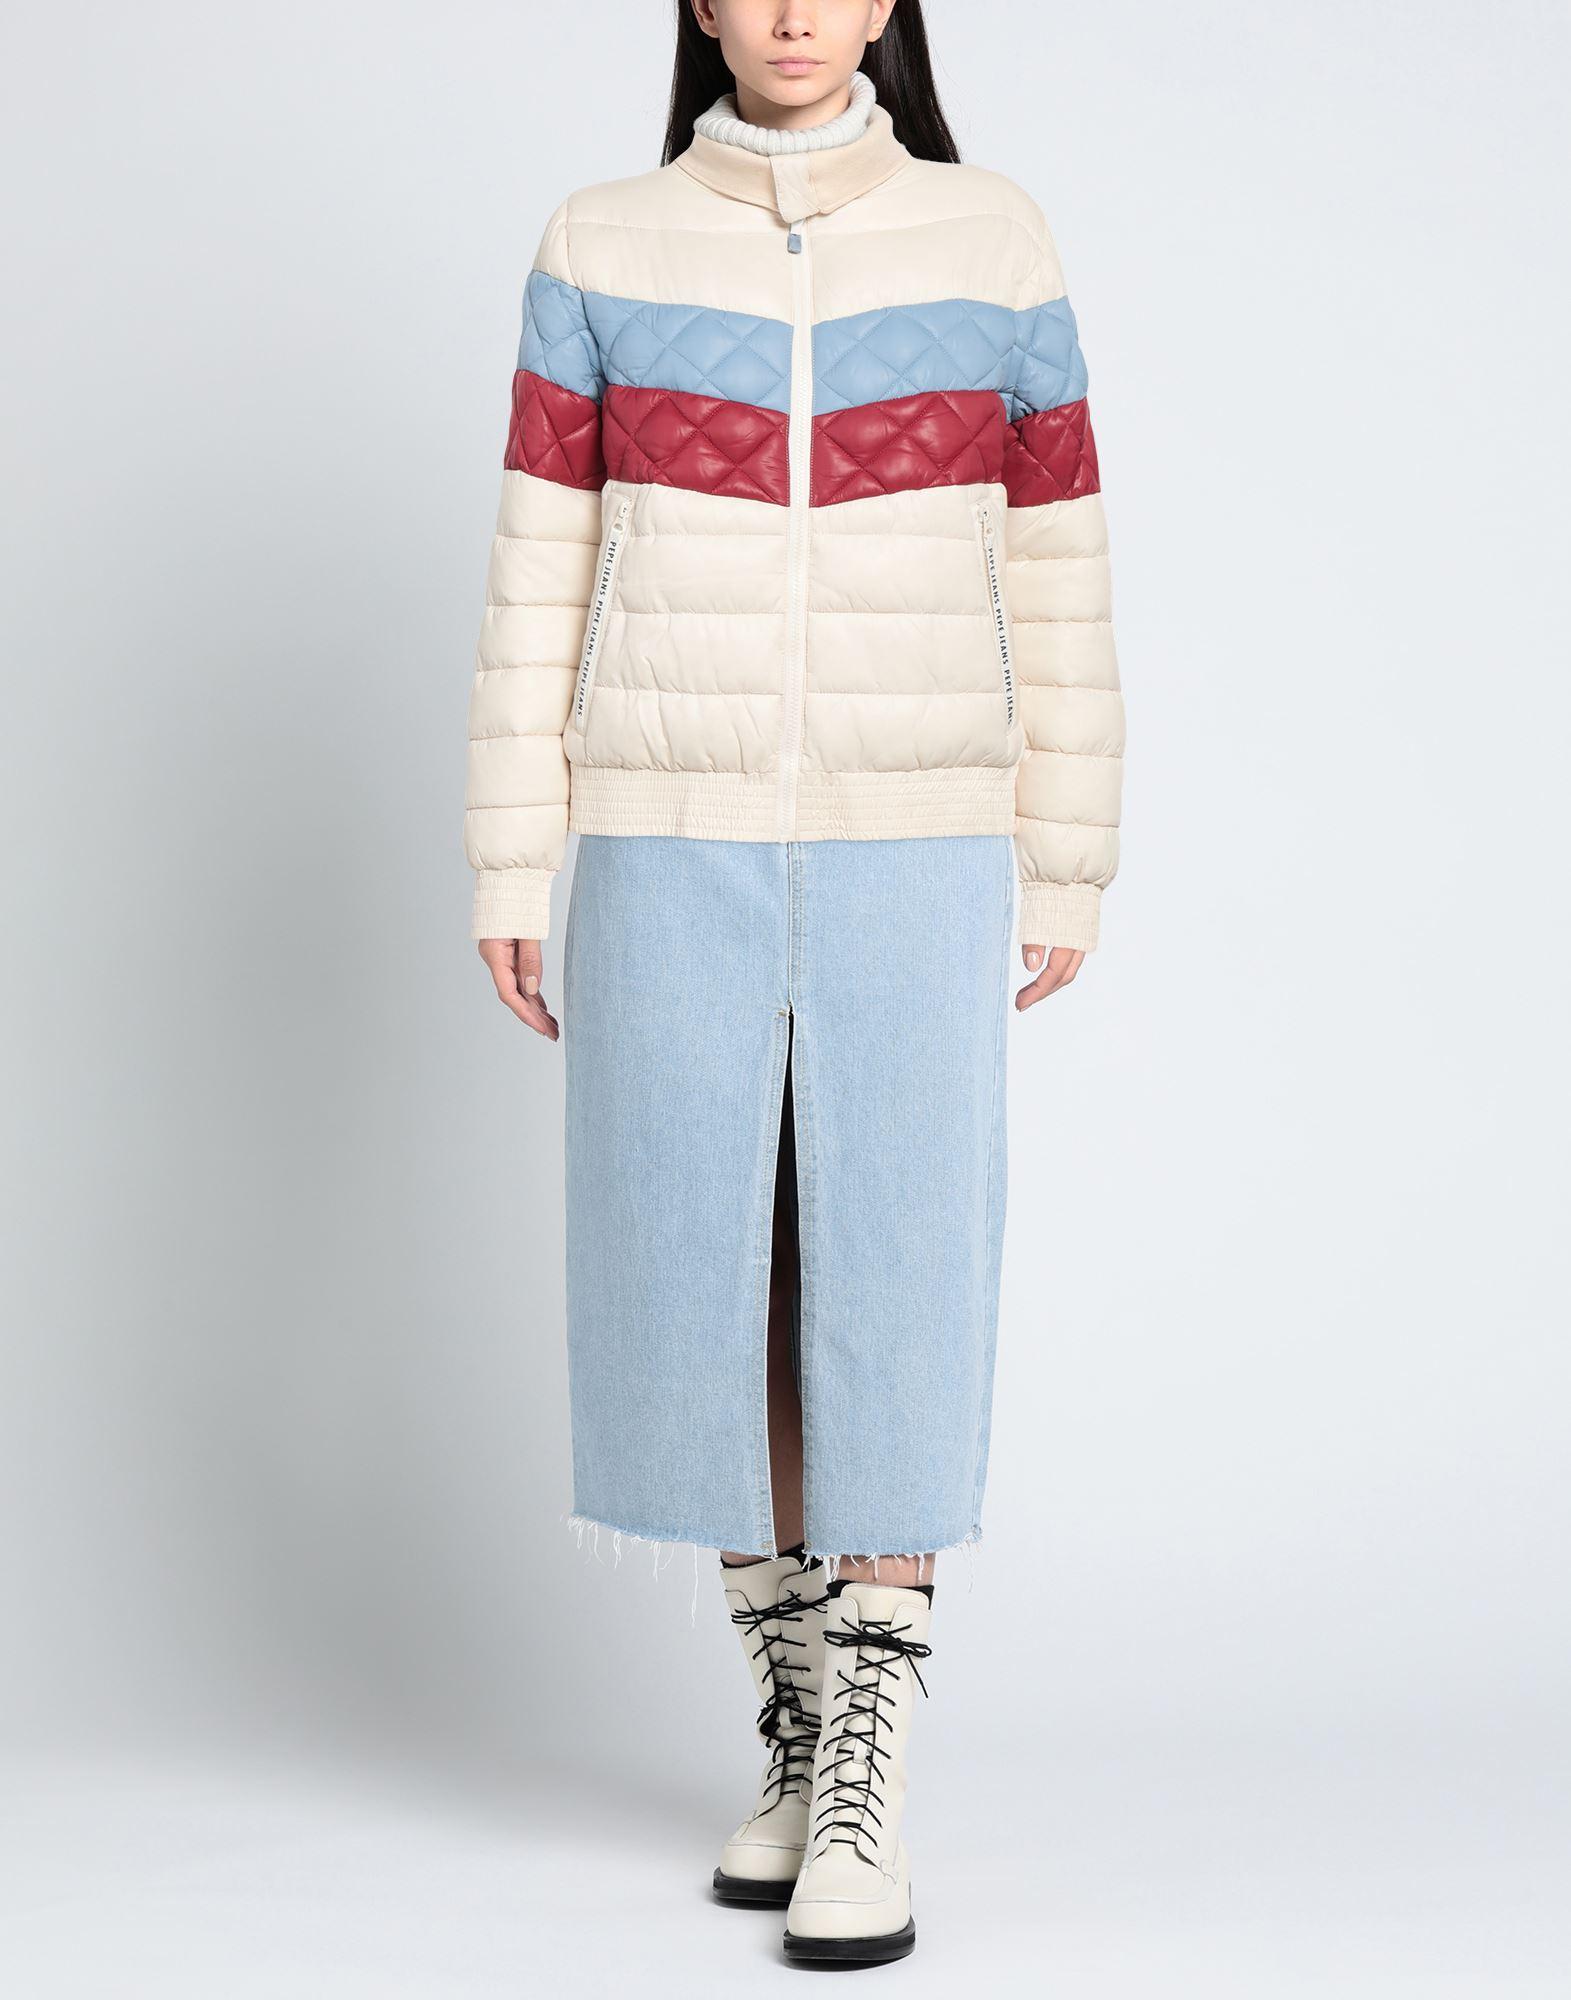 Monarchy mound retreat Pepe Jeans Down Jacket in White | Lyst